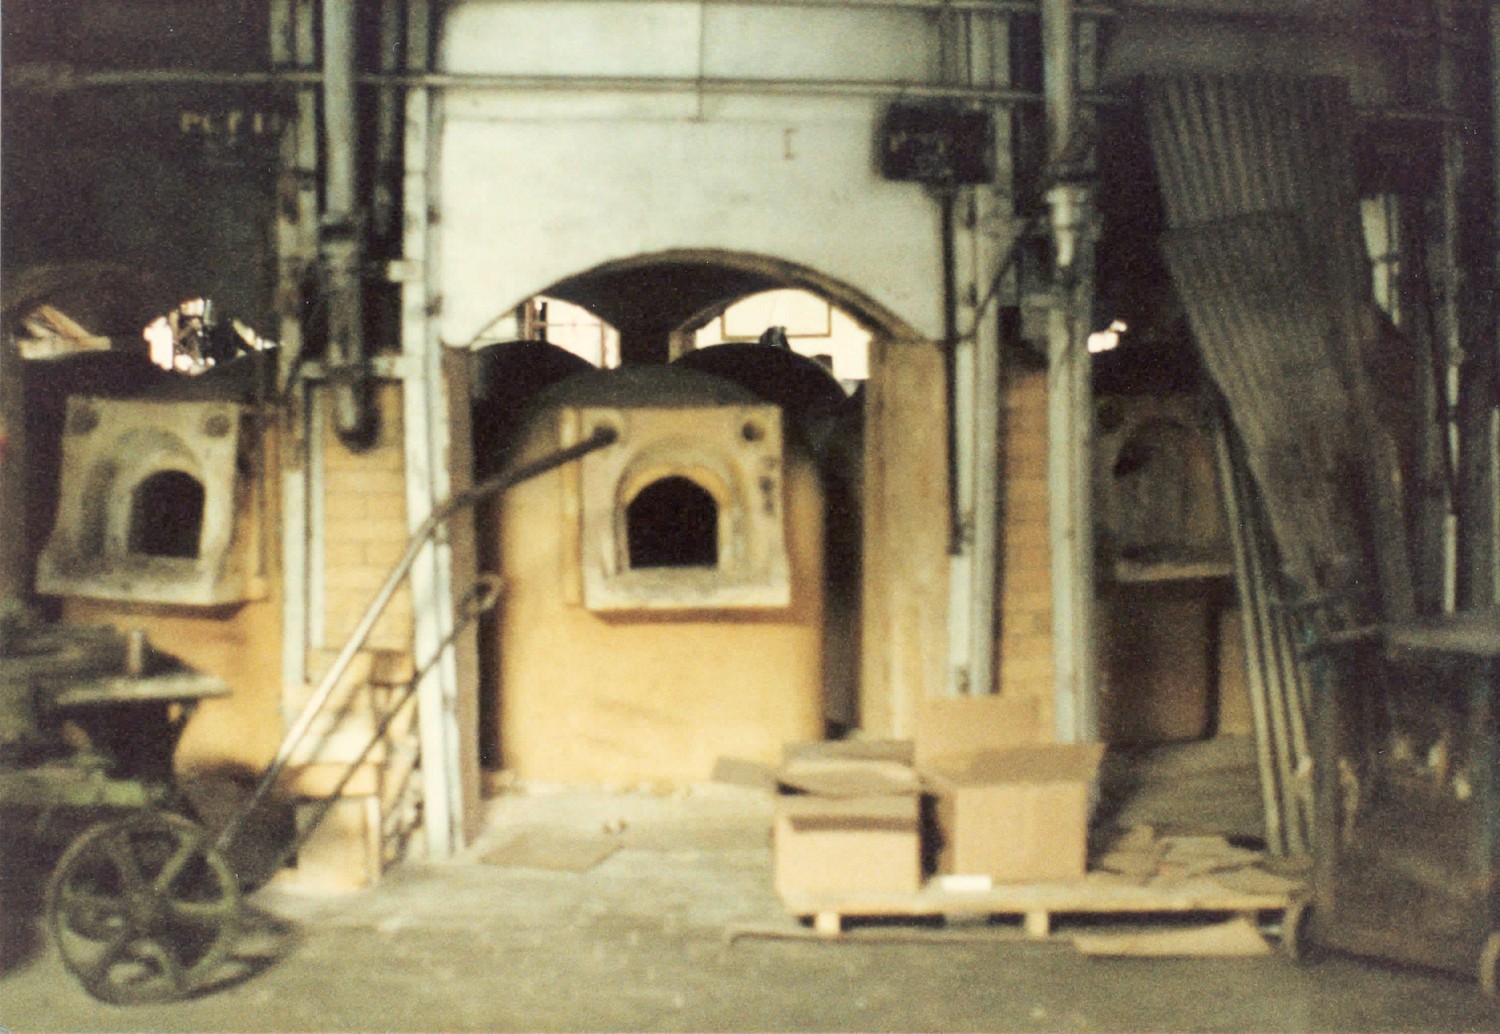 Imperial Glass Company, Bellaire Ohio Pot Furnace looking east (1983)